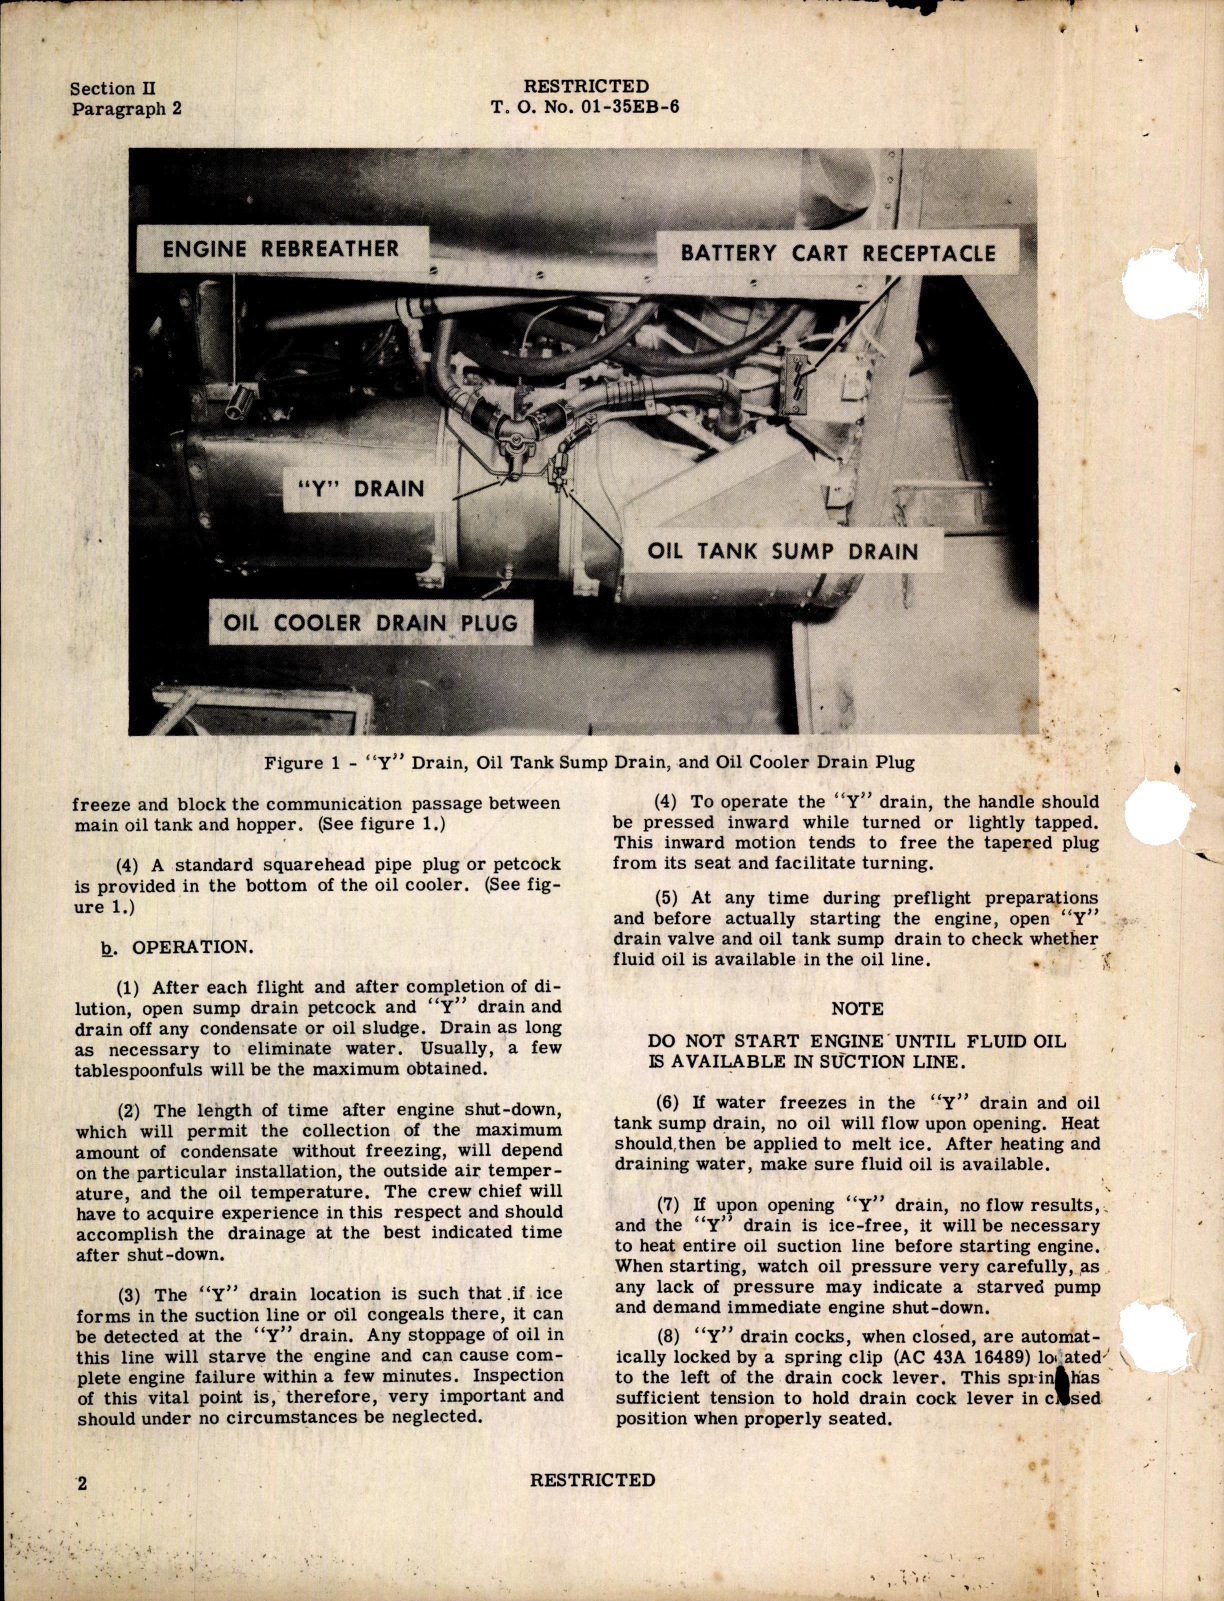 Sample page 6 from AirCorps Library document: Cold Weather Operation for B-26B-1, B-26C, Marauder II, and JM-1